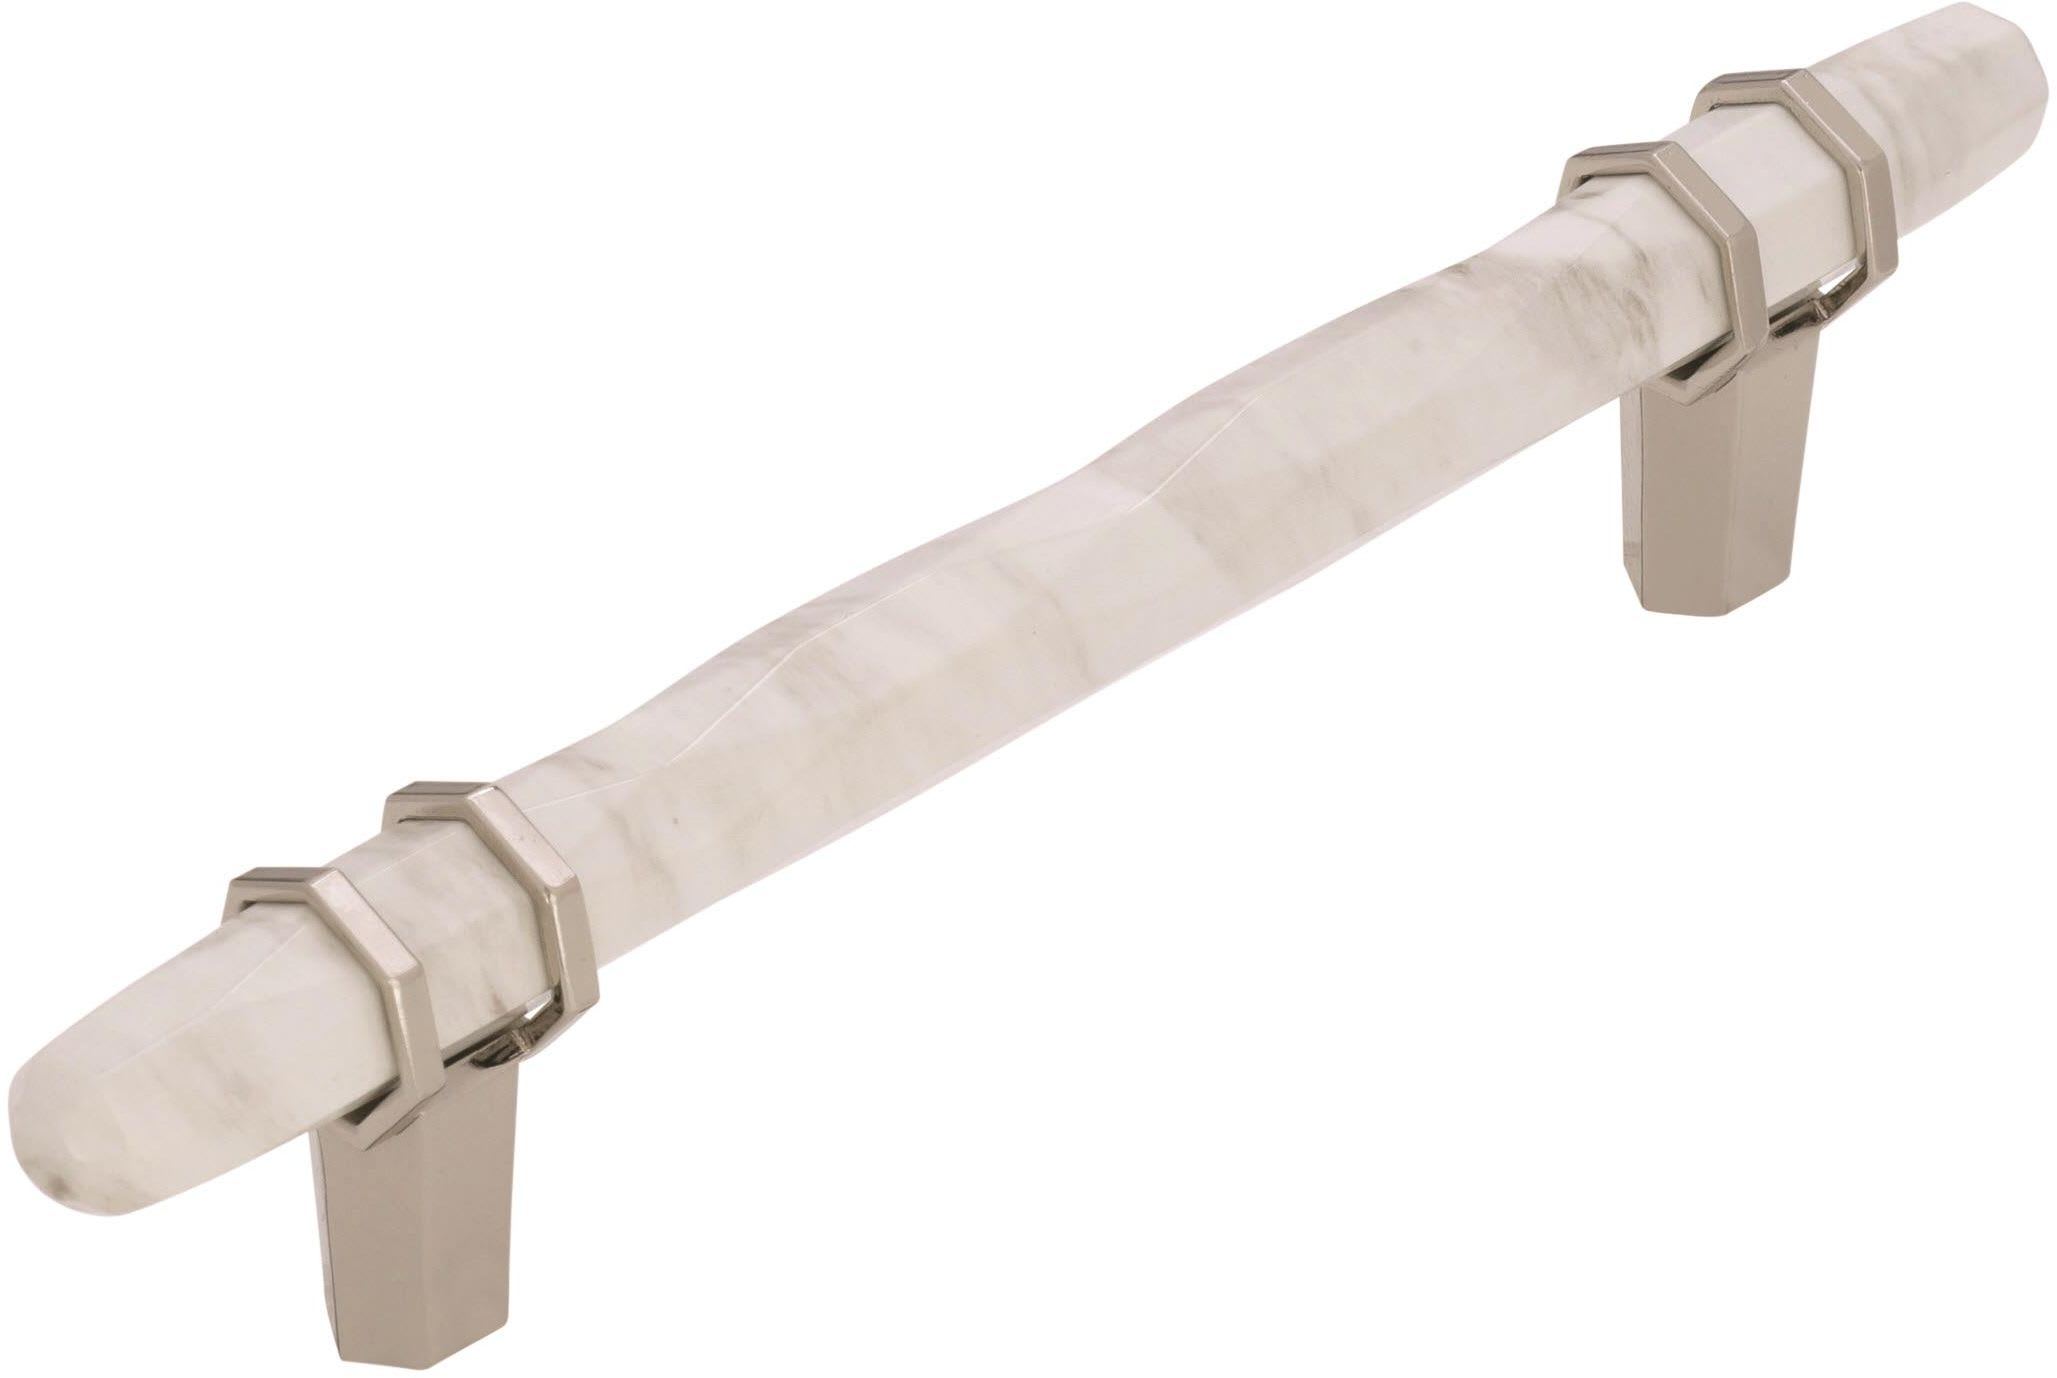 128 mm C-to-C Marble White/Polished Nickel Cabinet Pulls Amerock 5-1/16 in.